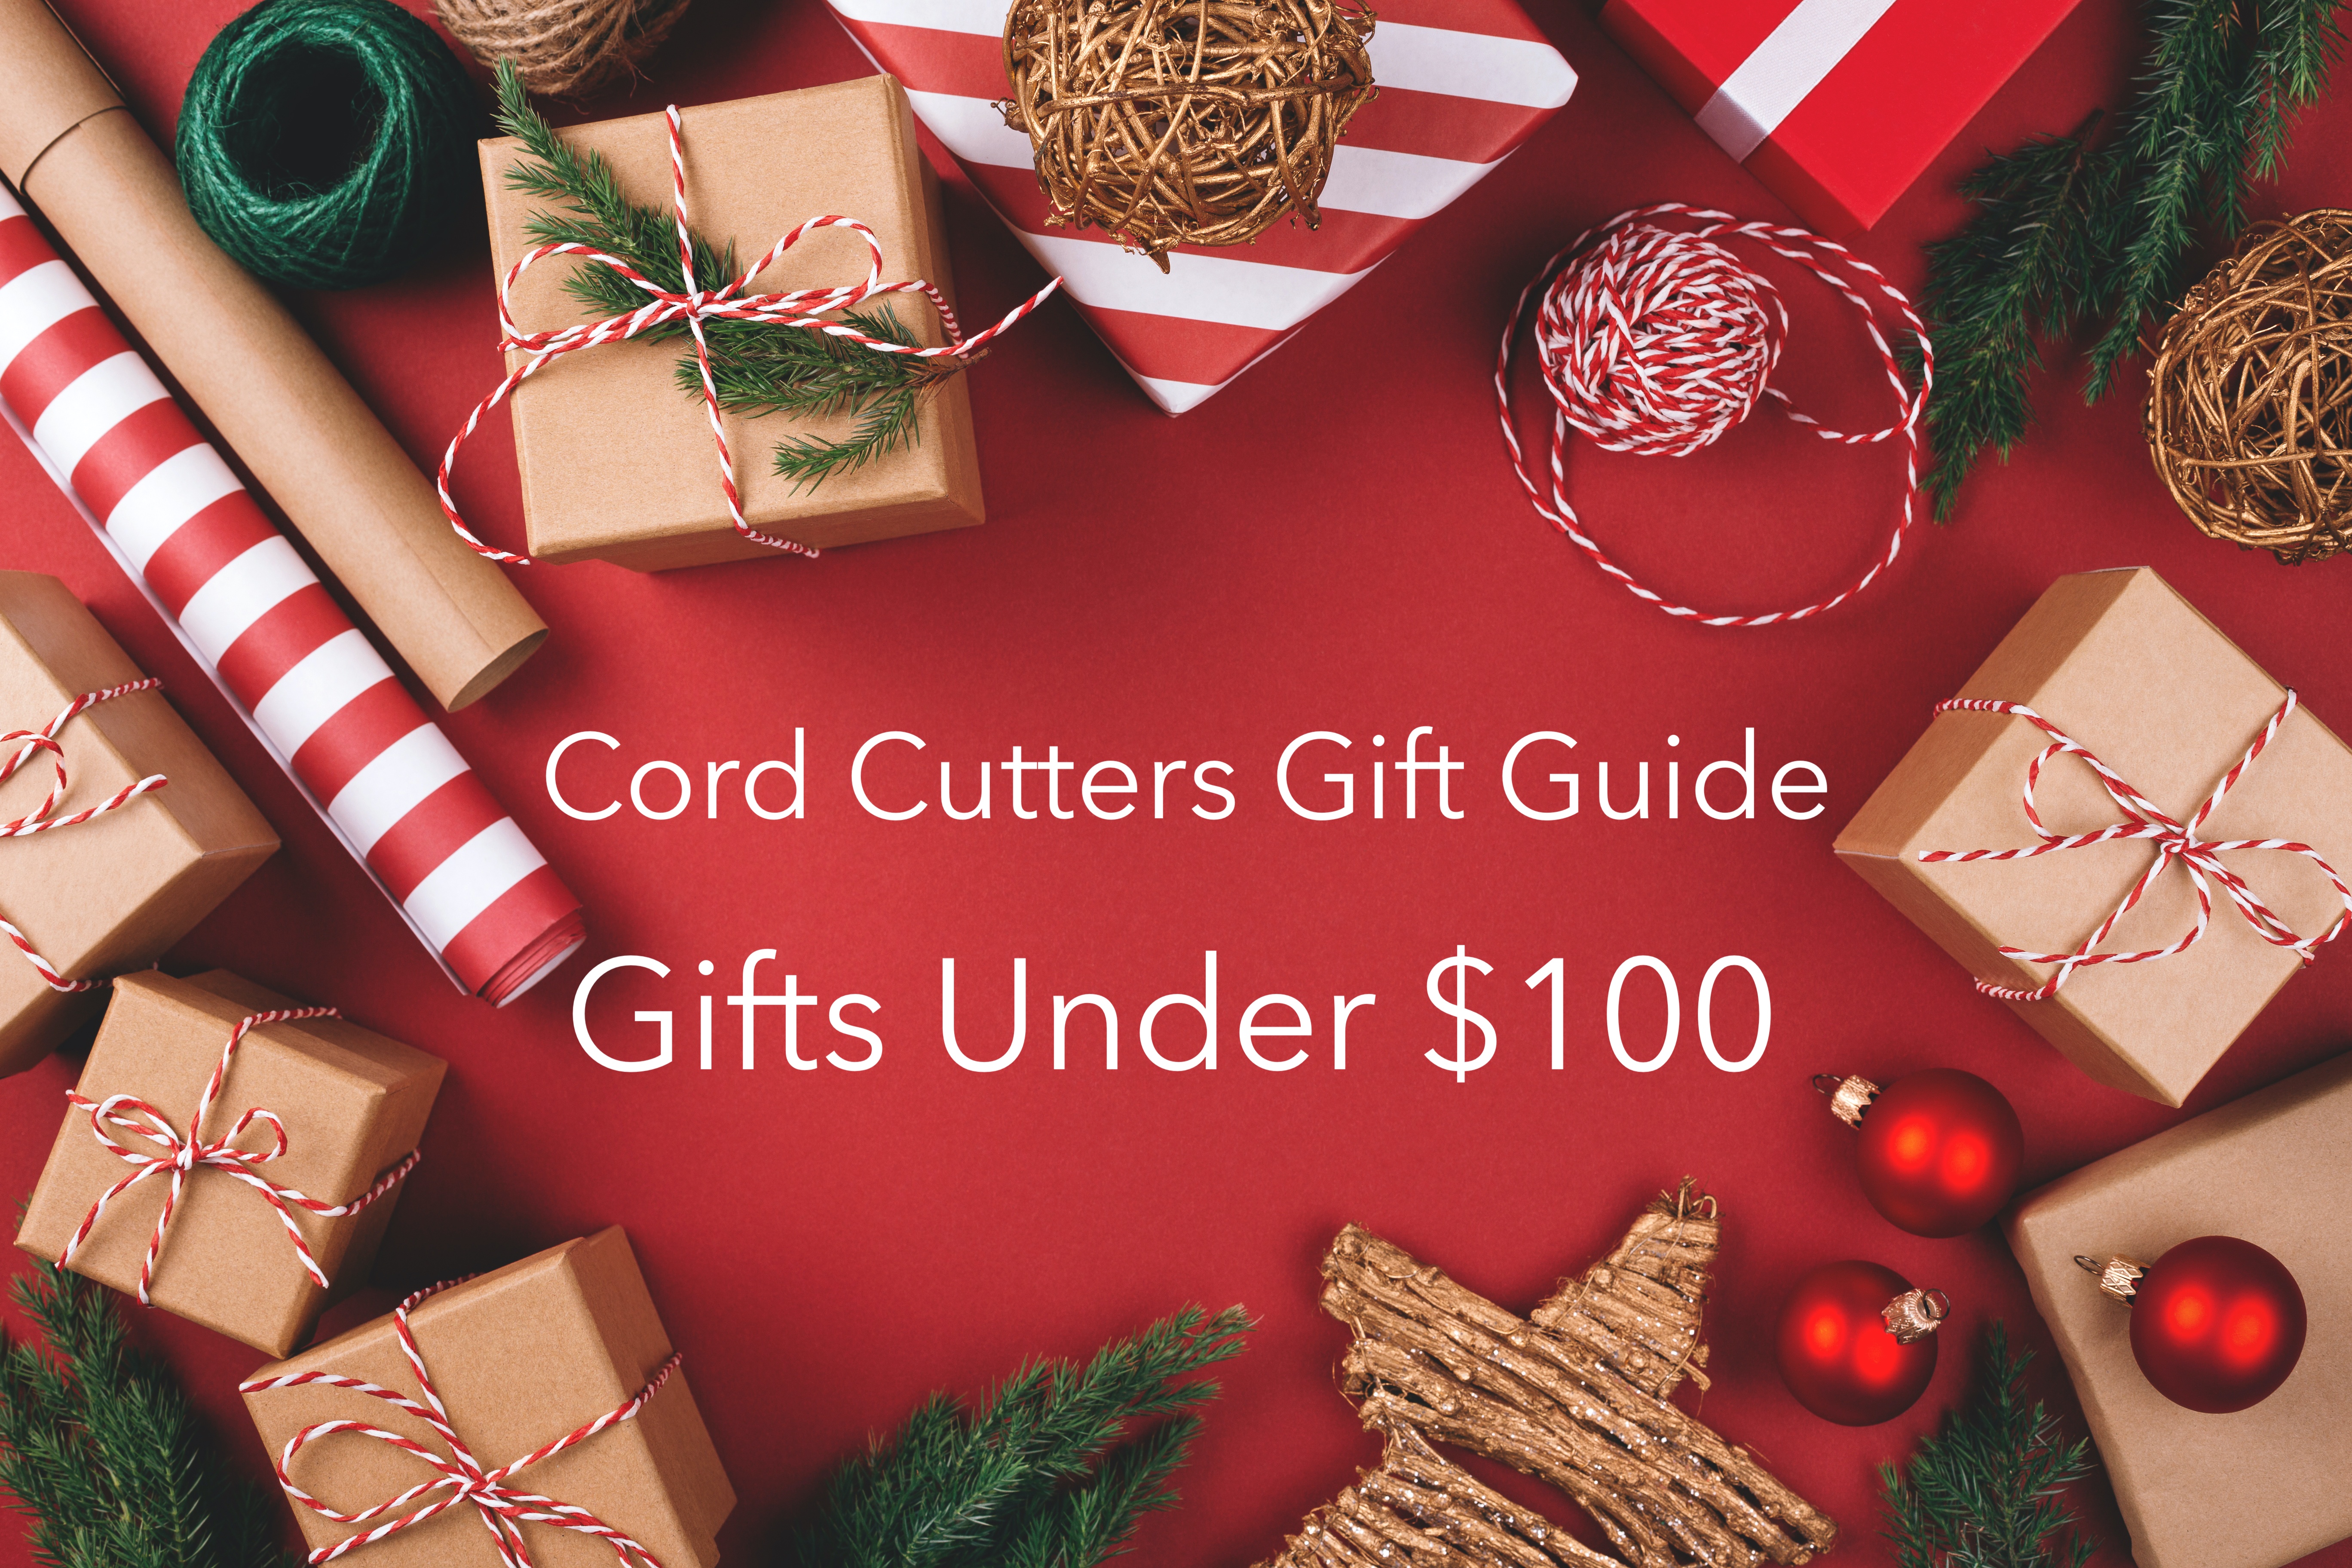 Gift Guide: Gifts for Cord Cutters Under $100